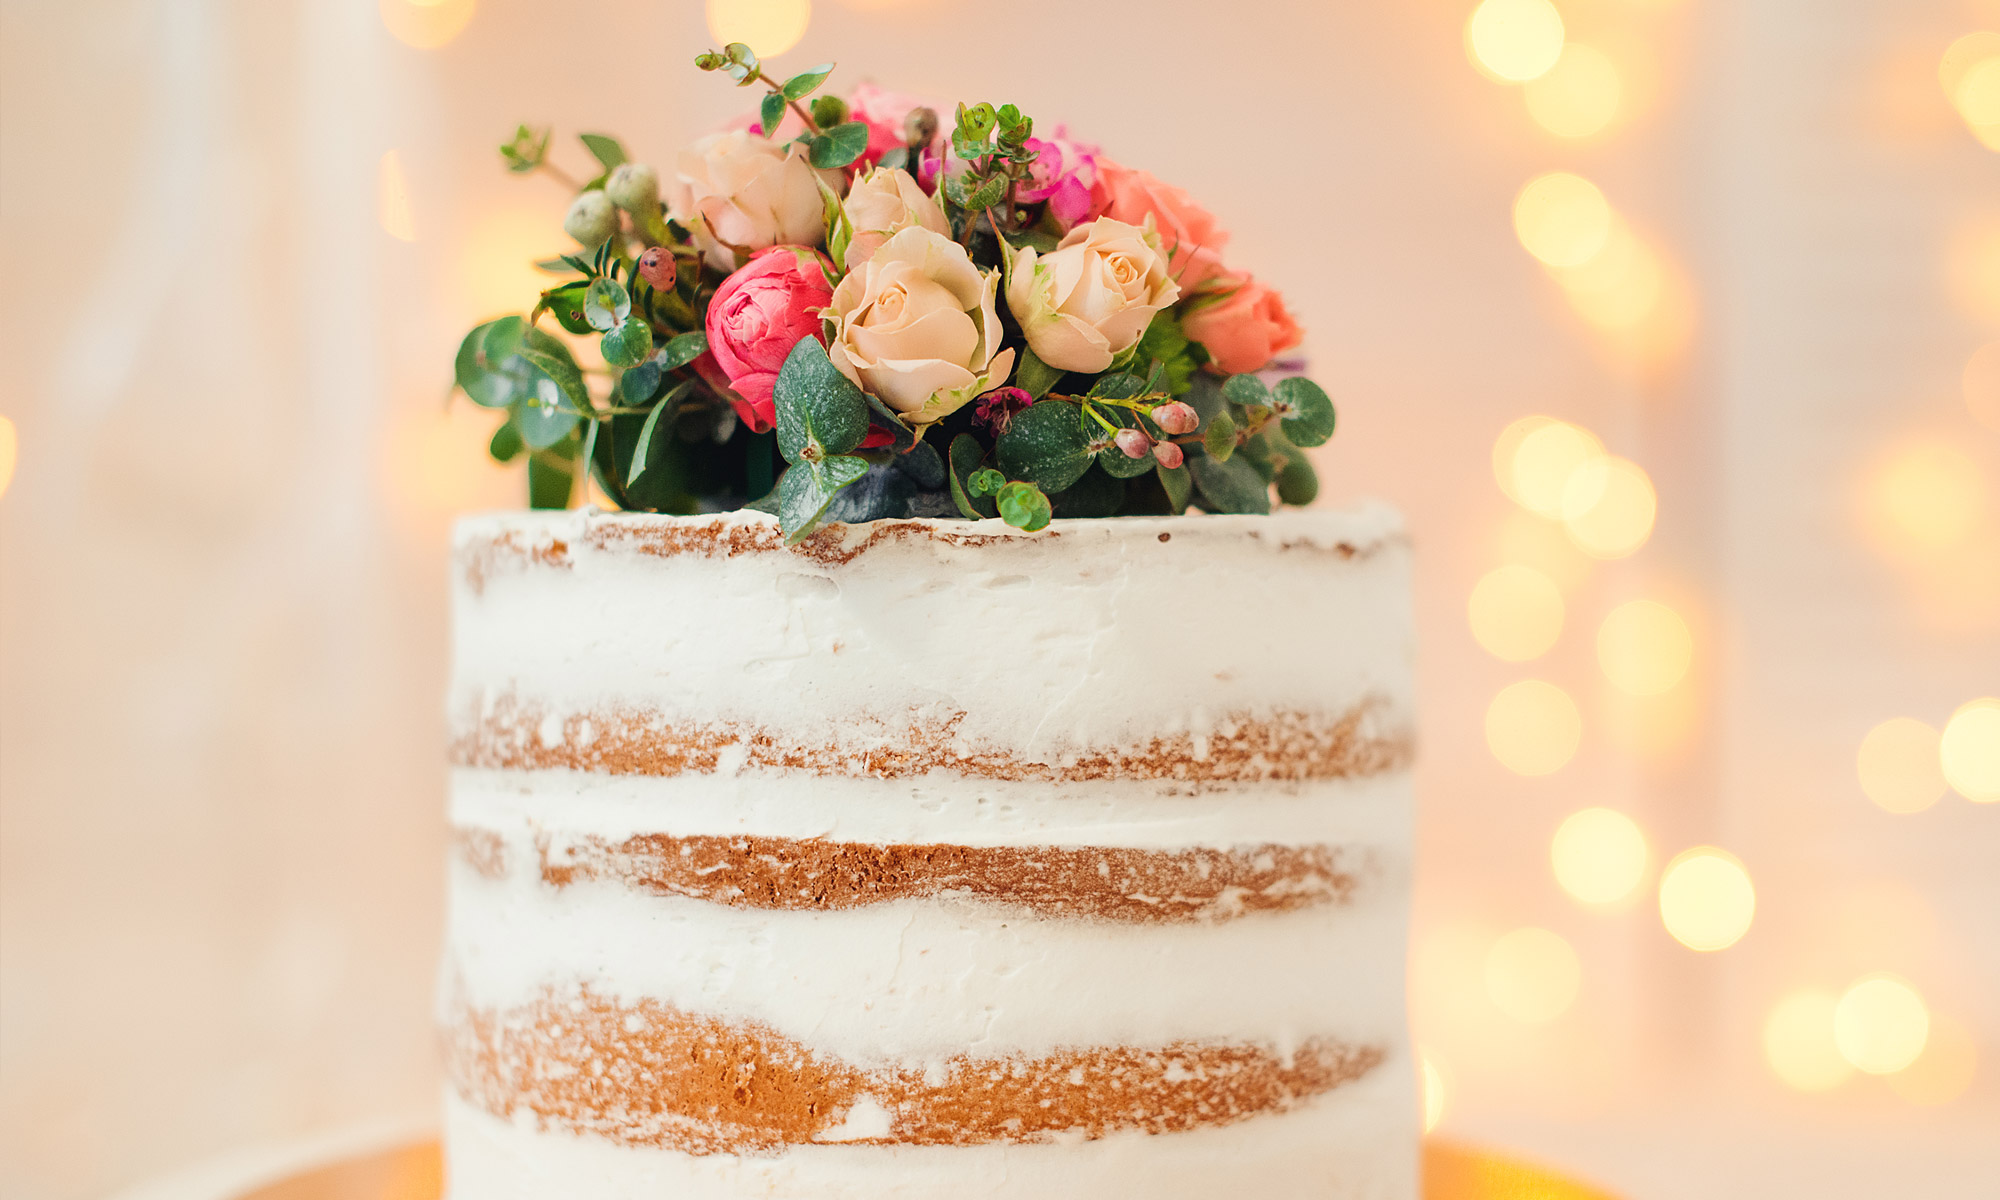 Wedding Cakes Continue to Inspire